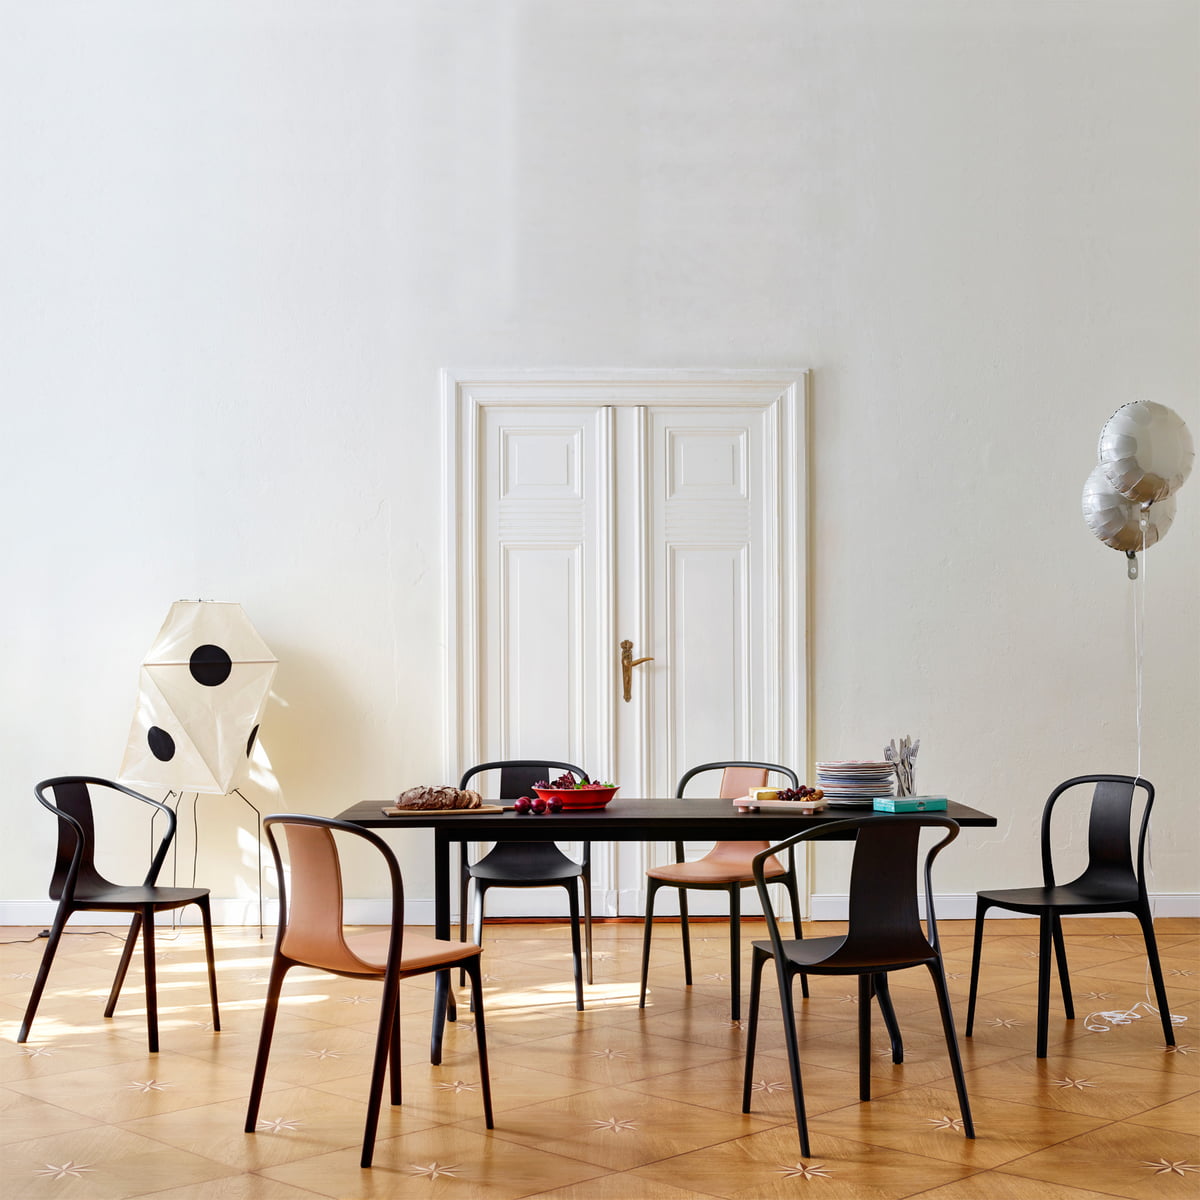 Belleville Armchair Plastic by Vitra in our shop